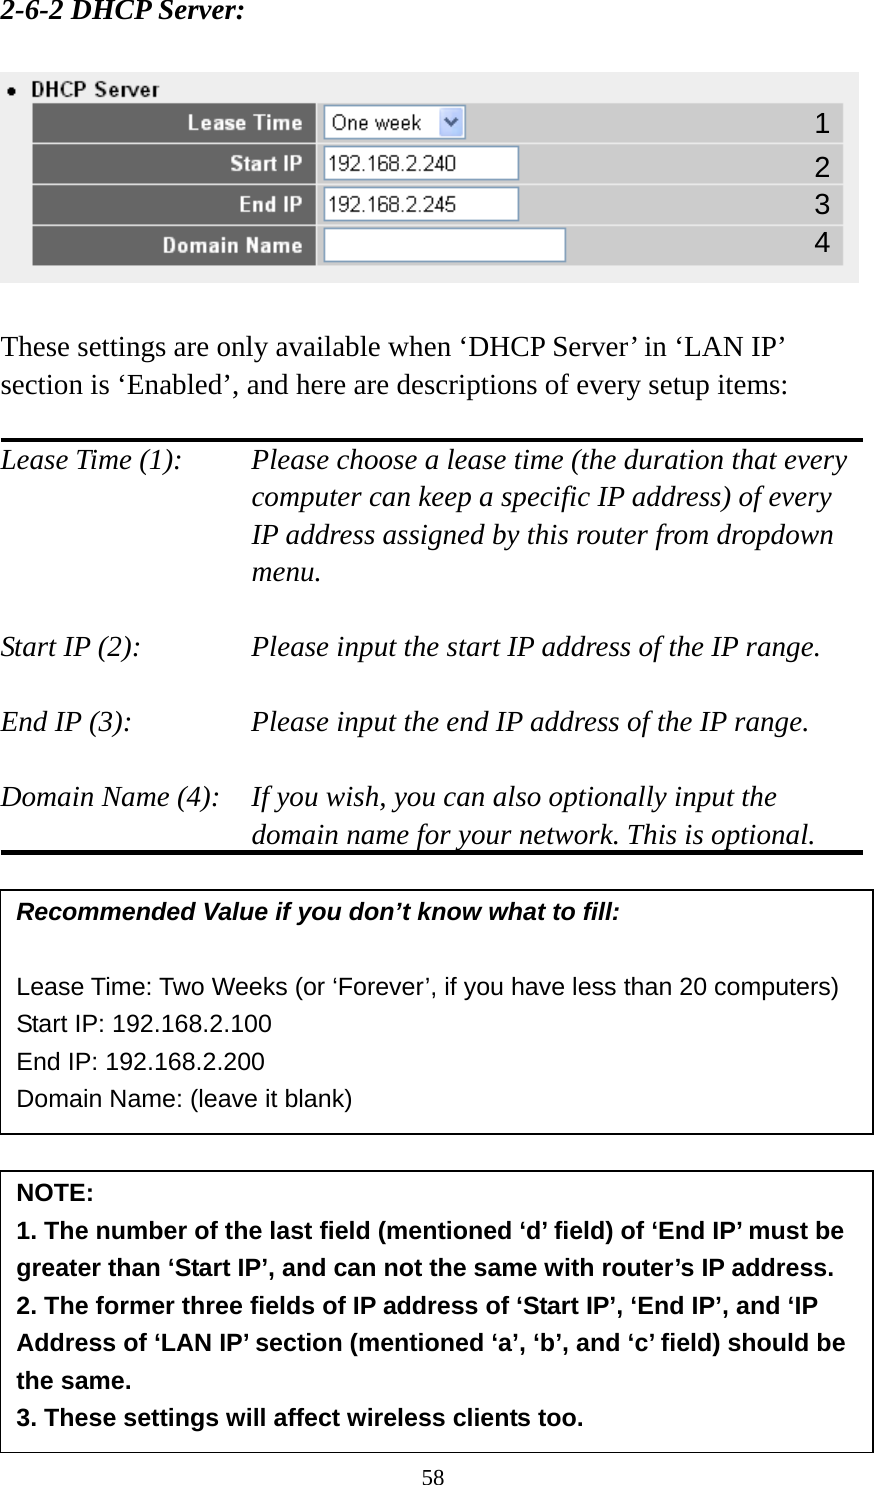 58 2-6-2 DHCP Server:    These settings are only available when ‘DHCP Server’ in ‘LAN IP’ section is ‘Enabled’, and here are descriptions of every setup items:  Lease Time (1):    Please choose a lease time (the duration that every computer can keep a specific IP address) of every IP address assigned by this router from dropdown menu.  Start IP (2):      Please input the start IP address of the IP range.  End IP (3):       Please input the end IP address of the IP range.  Domain Name (4):    If you wish, you can also optionally input the domain name for your network. This is optional.                Recommended Value if you don’t know what to fill:  Lease Time: Two Weeks (or ‘Forever’, if you have less than 20 computers) Start IP: 192.168.2.100 End IP: 192.168.2.200 Domain Name: (leave it blank) NOTE:  1. The number of the last field (mentioned ‘d’ field) of ‘End IP’ must be greater than ‘Start IP’, and can not the same with router’s IP address. 2. The former three fields of IP address of ‘Start IP’, ‘End IP’, and ‘IP Address of ‘LAN IP’ section (mentioned ‘a’, ‘b’, and ‘c’ field) should be the same. 3. These settings will affect wireless clients too. 1 3 4 2 